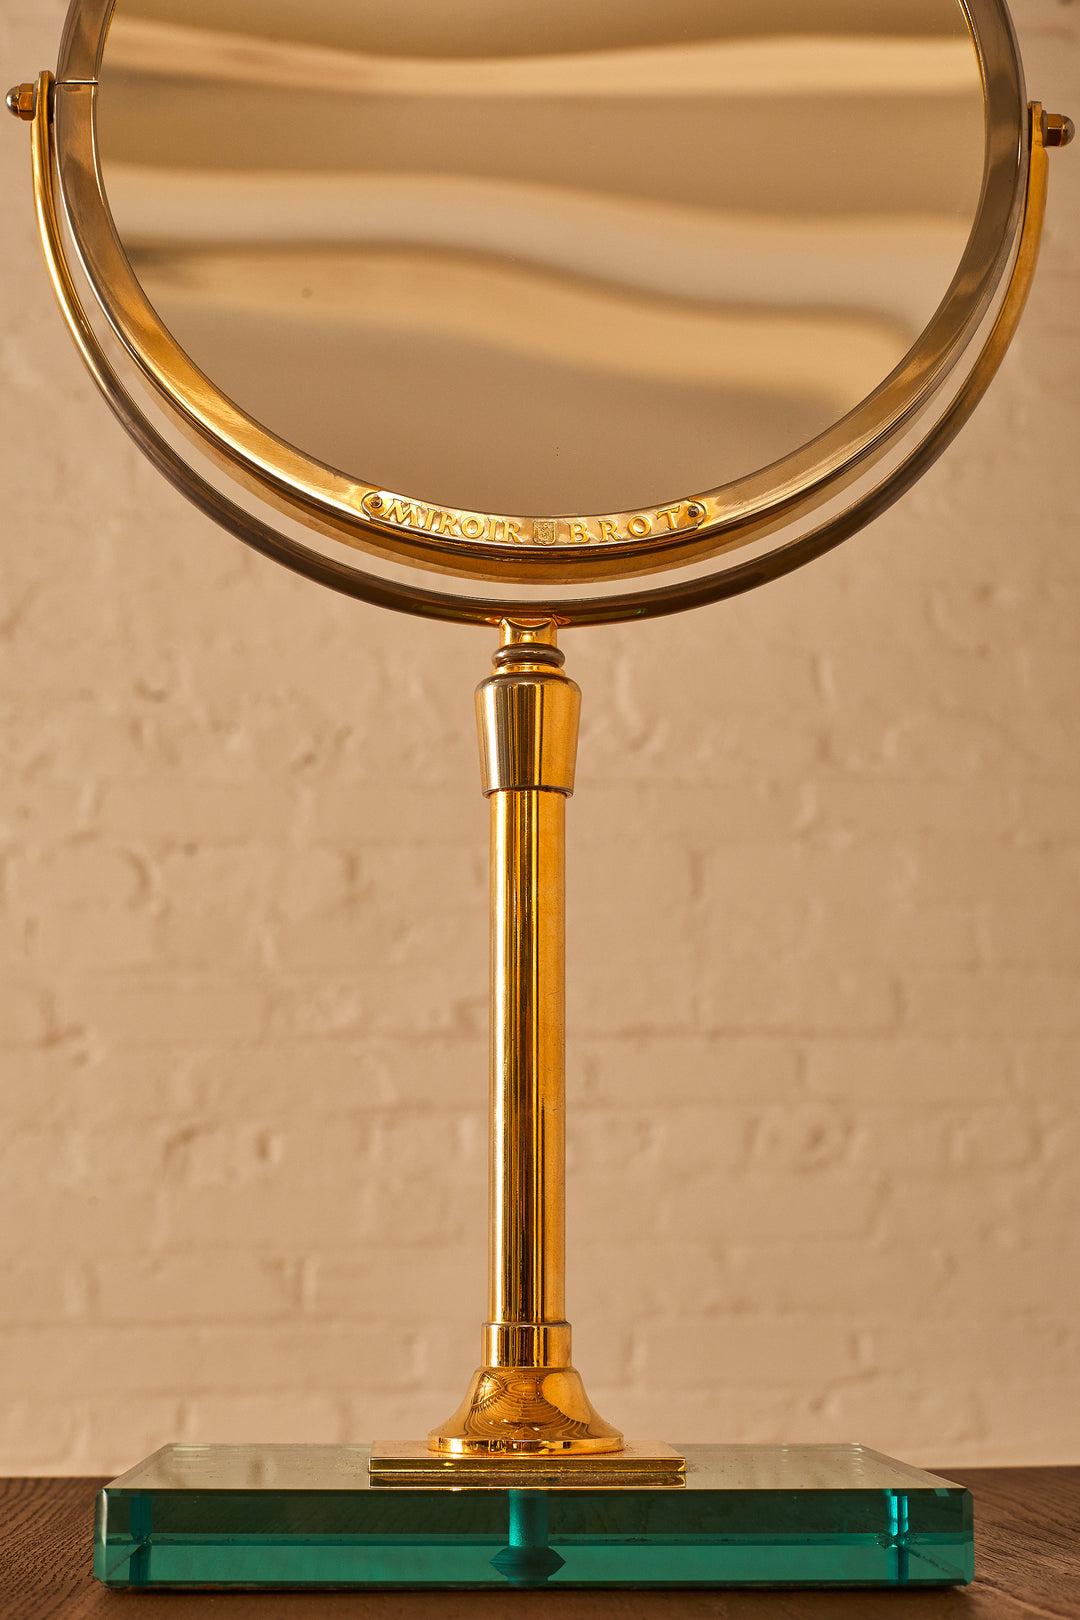 An elegant French vanity mirror by renowned manufacturer Miroir Brot. Extremely high quality make and materials. It is reversible with a magnifying mirror on the opposite side with an adjustable height and a blueglass base. Made in France.

About